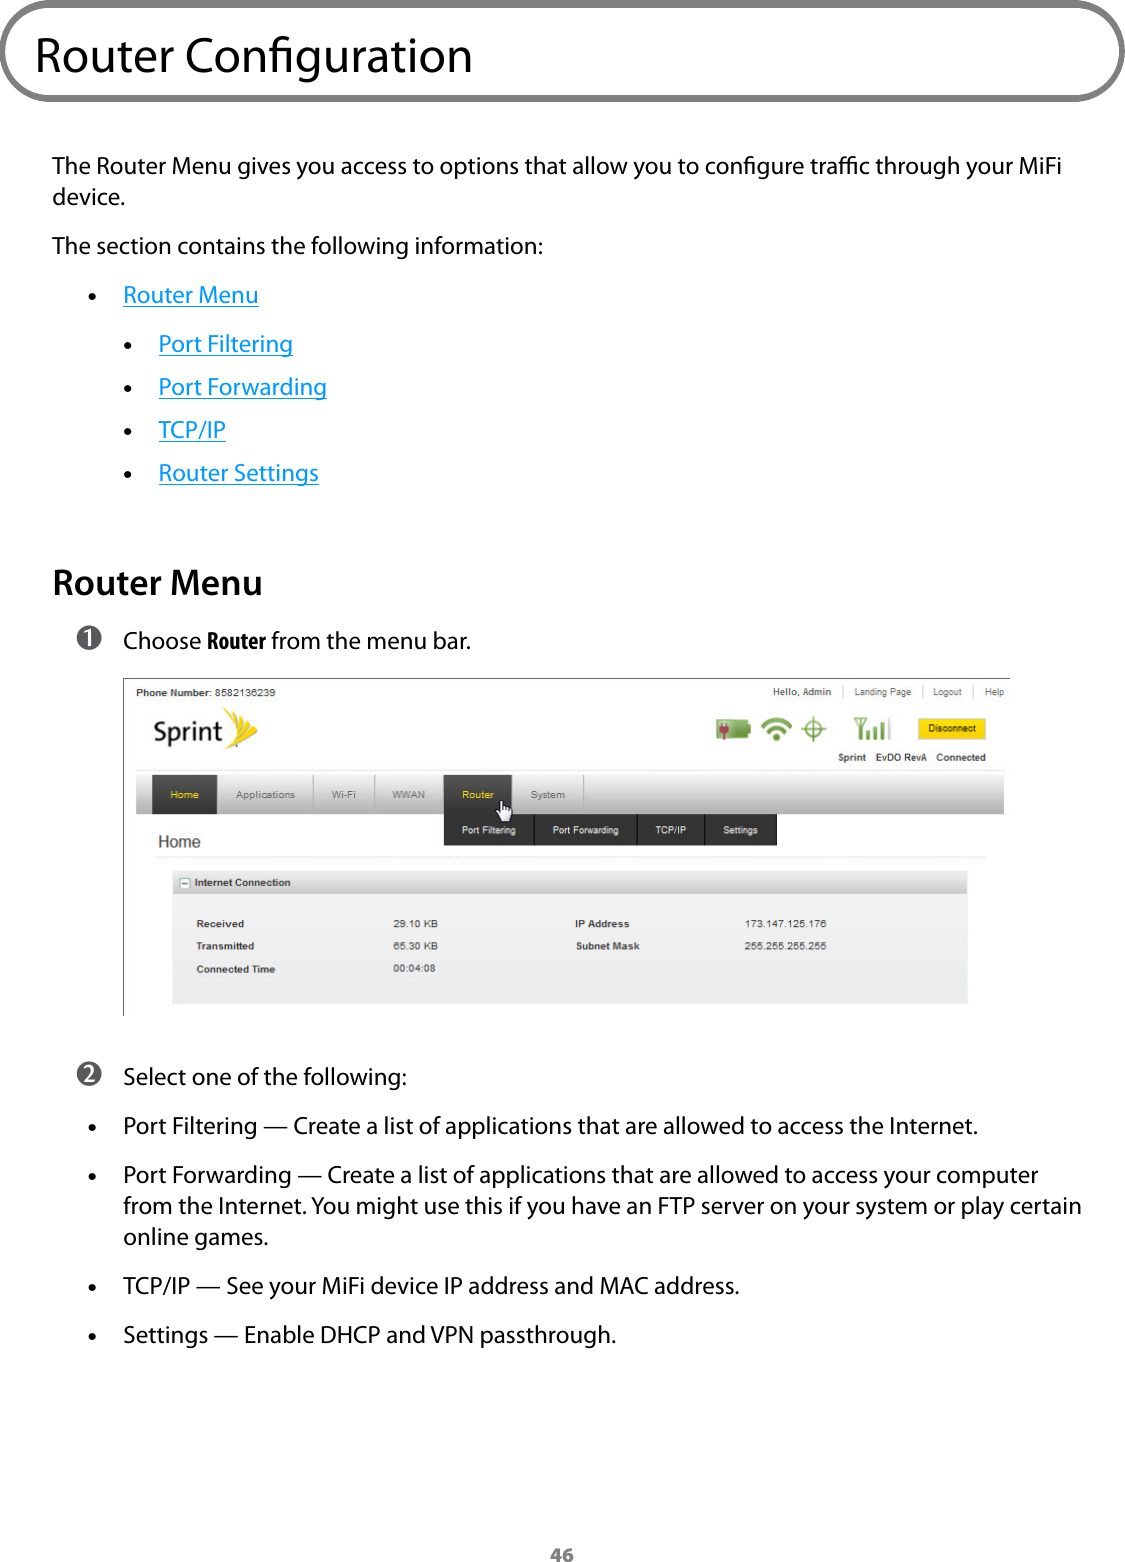 46Router CongurationThe Router Menu gives you access to options that allow you to congure trac through your MiFi device.The section contains the following information: •Router Menu •Port Filtering •Port Forwarding •TCP/IP •Router SettingsRouter Menu ➊ Choose Router from the menu bar. ➋ Select one of the following: •Port Filtering — Create a list of applications that are allowed to access the Internet. •Port Forwarding — Create a list of applications that are allowed to access your computer from the Internet. You might use this if you have an FTP server on your system or play certain online games. •TCP/IP — See your MiFi device IP address and MAC address. •Settings — Enable DHCP and VPN passthrough.